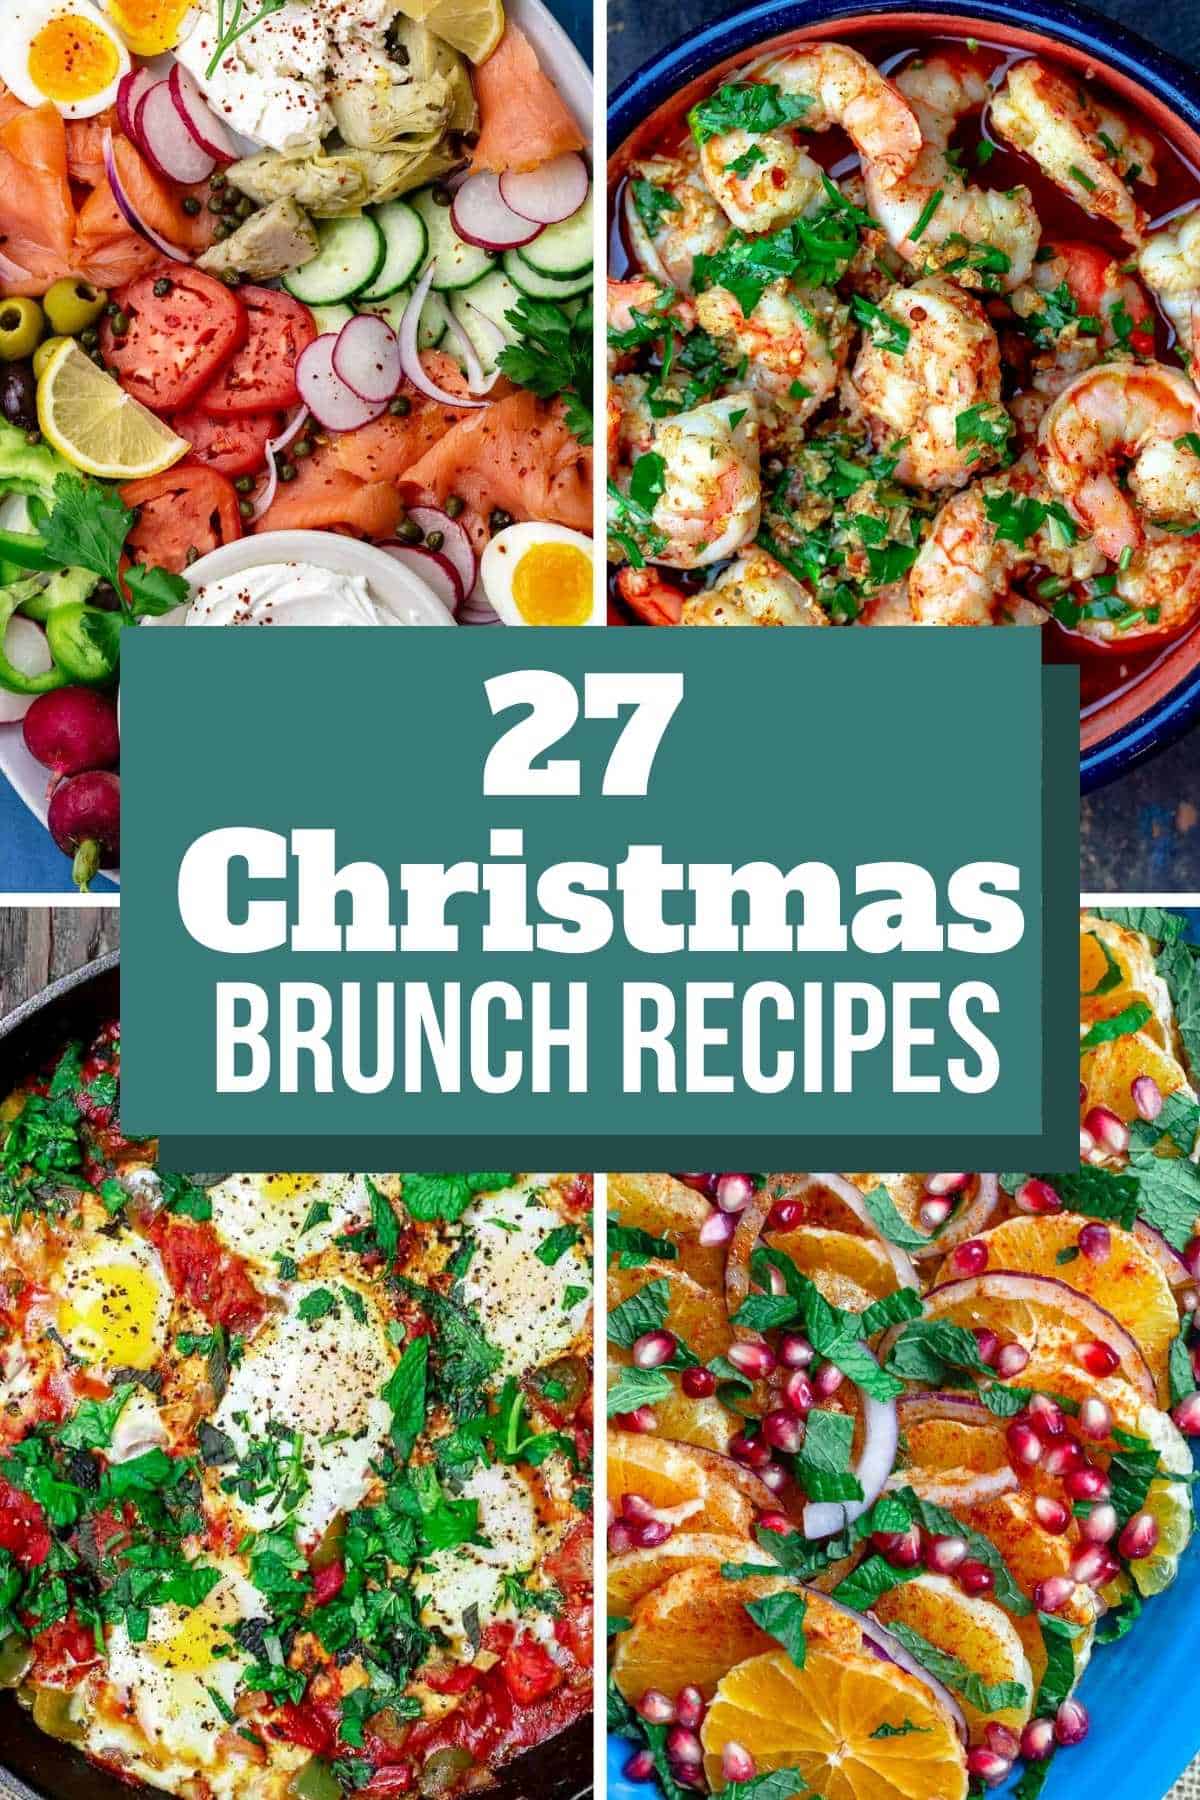 27 Christmas Brunch Recipes with a Mediterranean Twist The